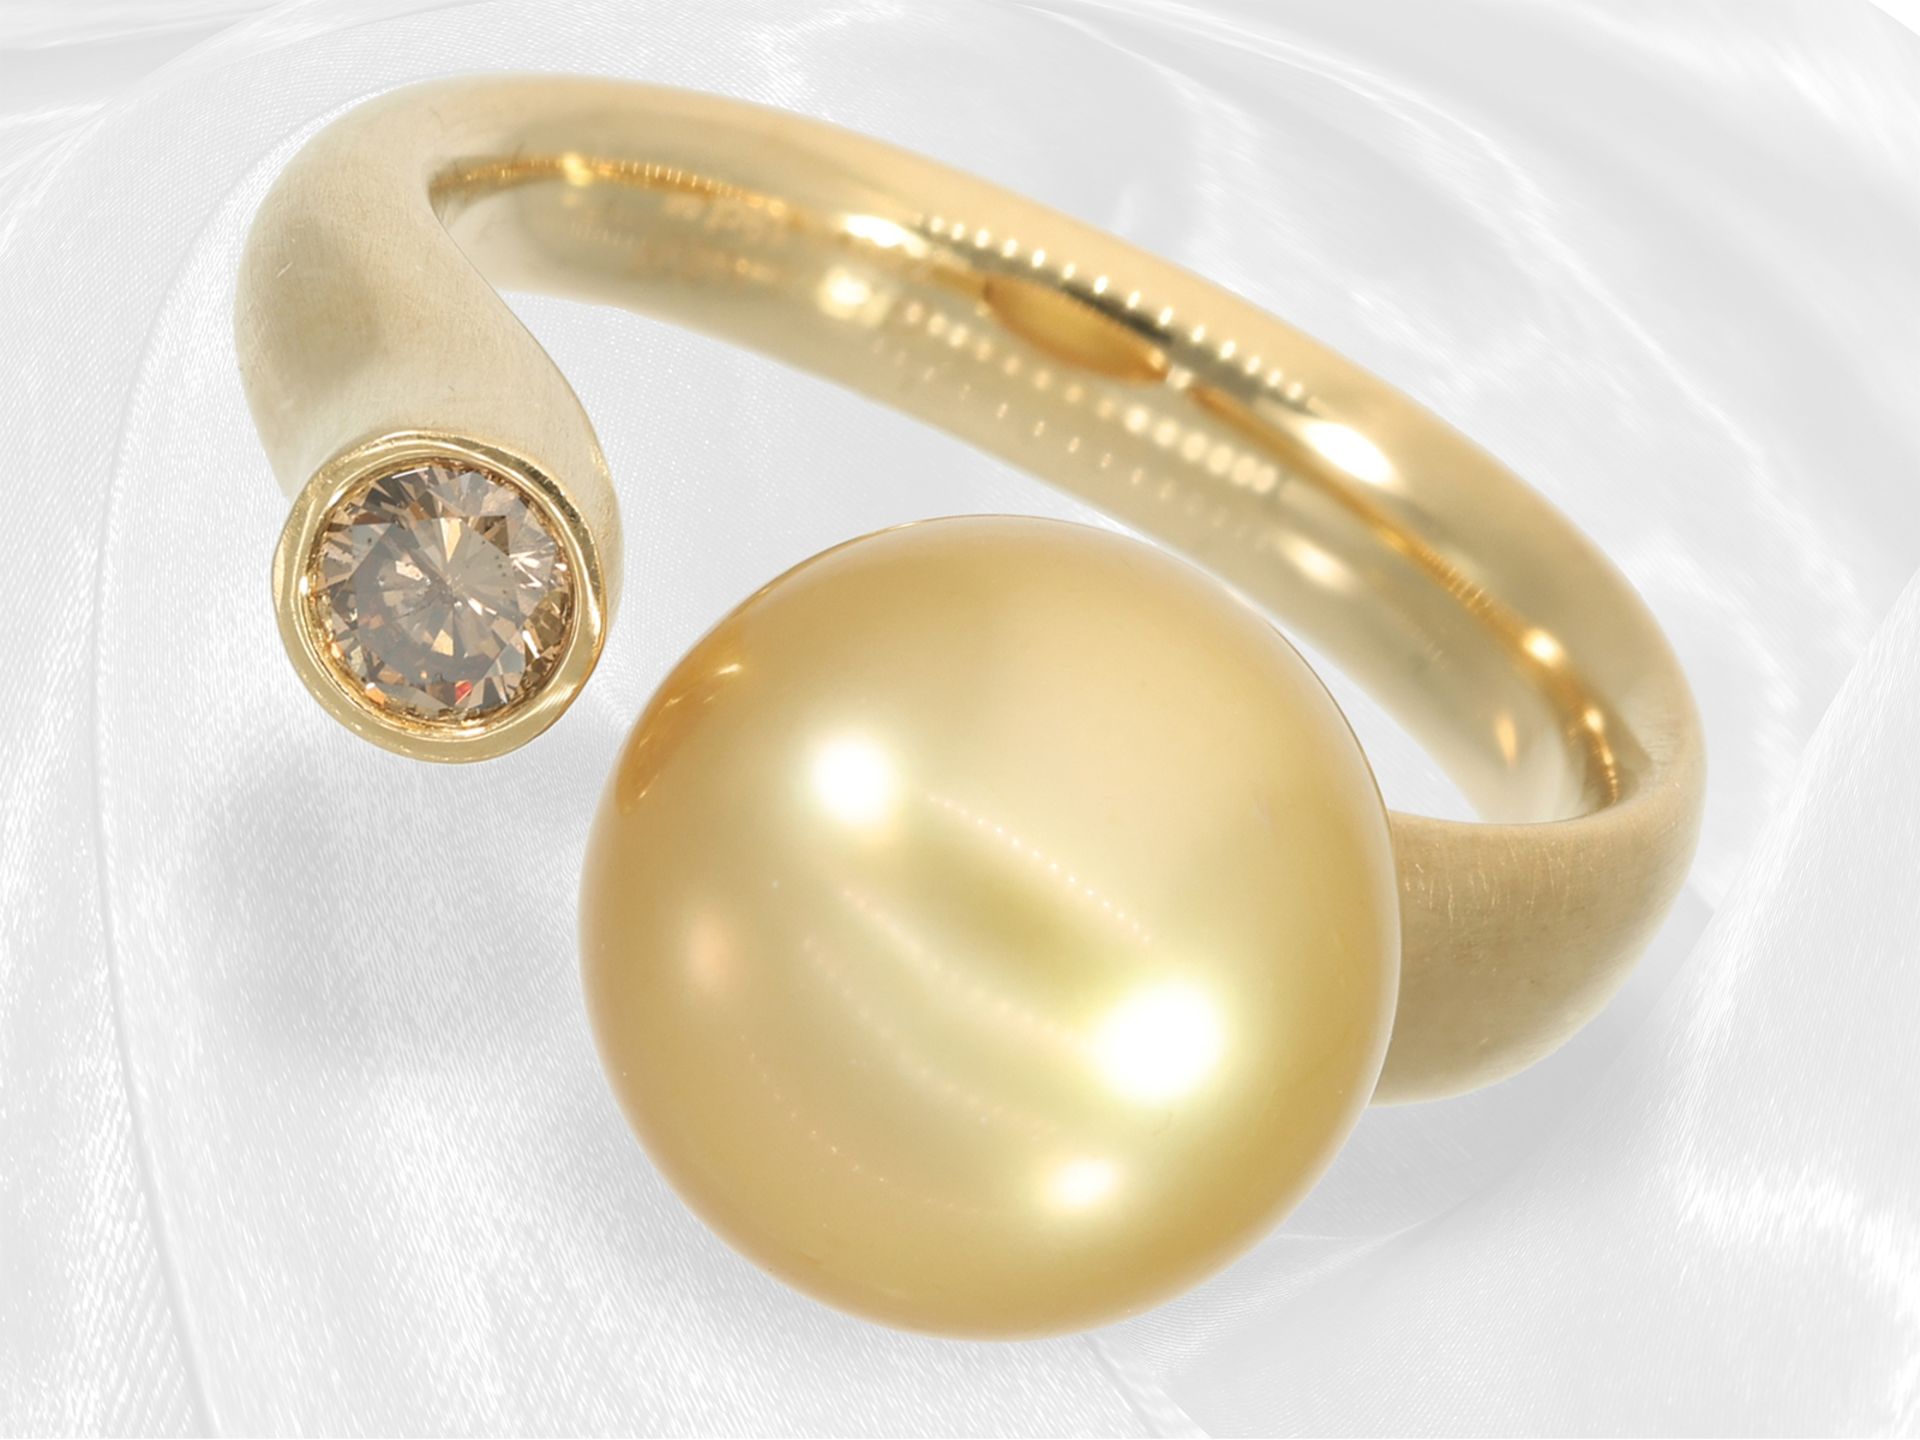 Elaborately crafted, high-quality designer ladies' ring with finest South Sea pearl and fancy diamon - Image 2 of 10